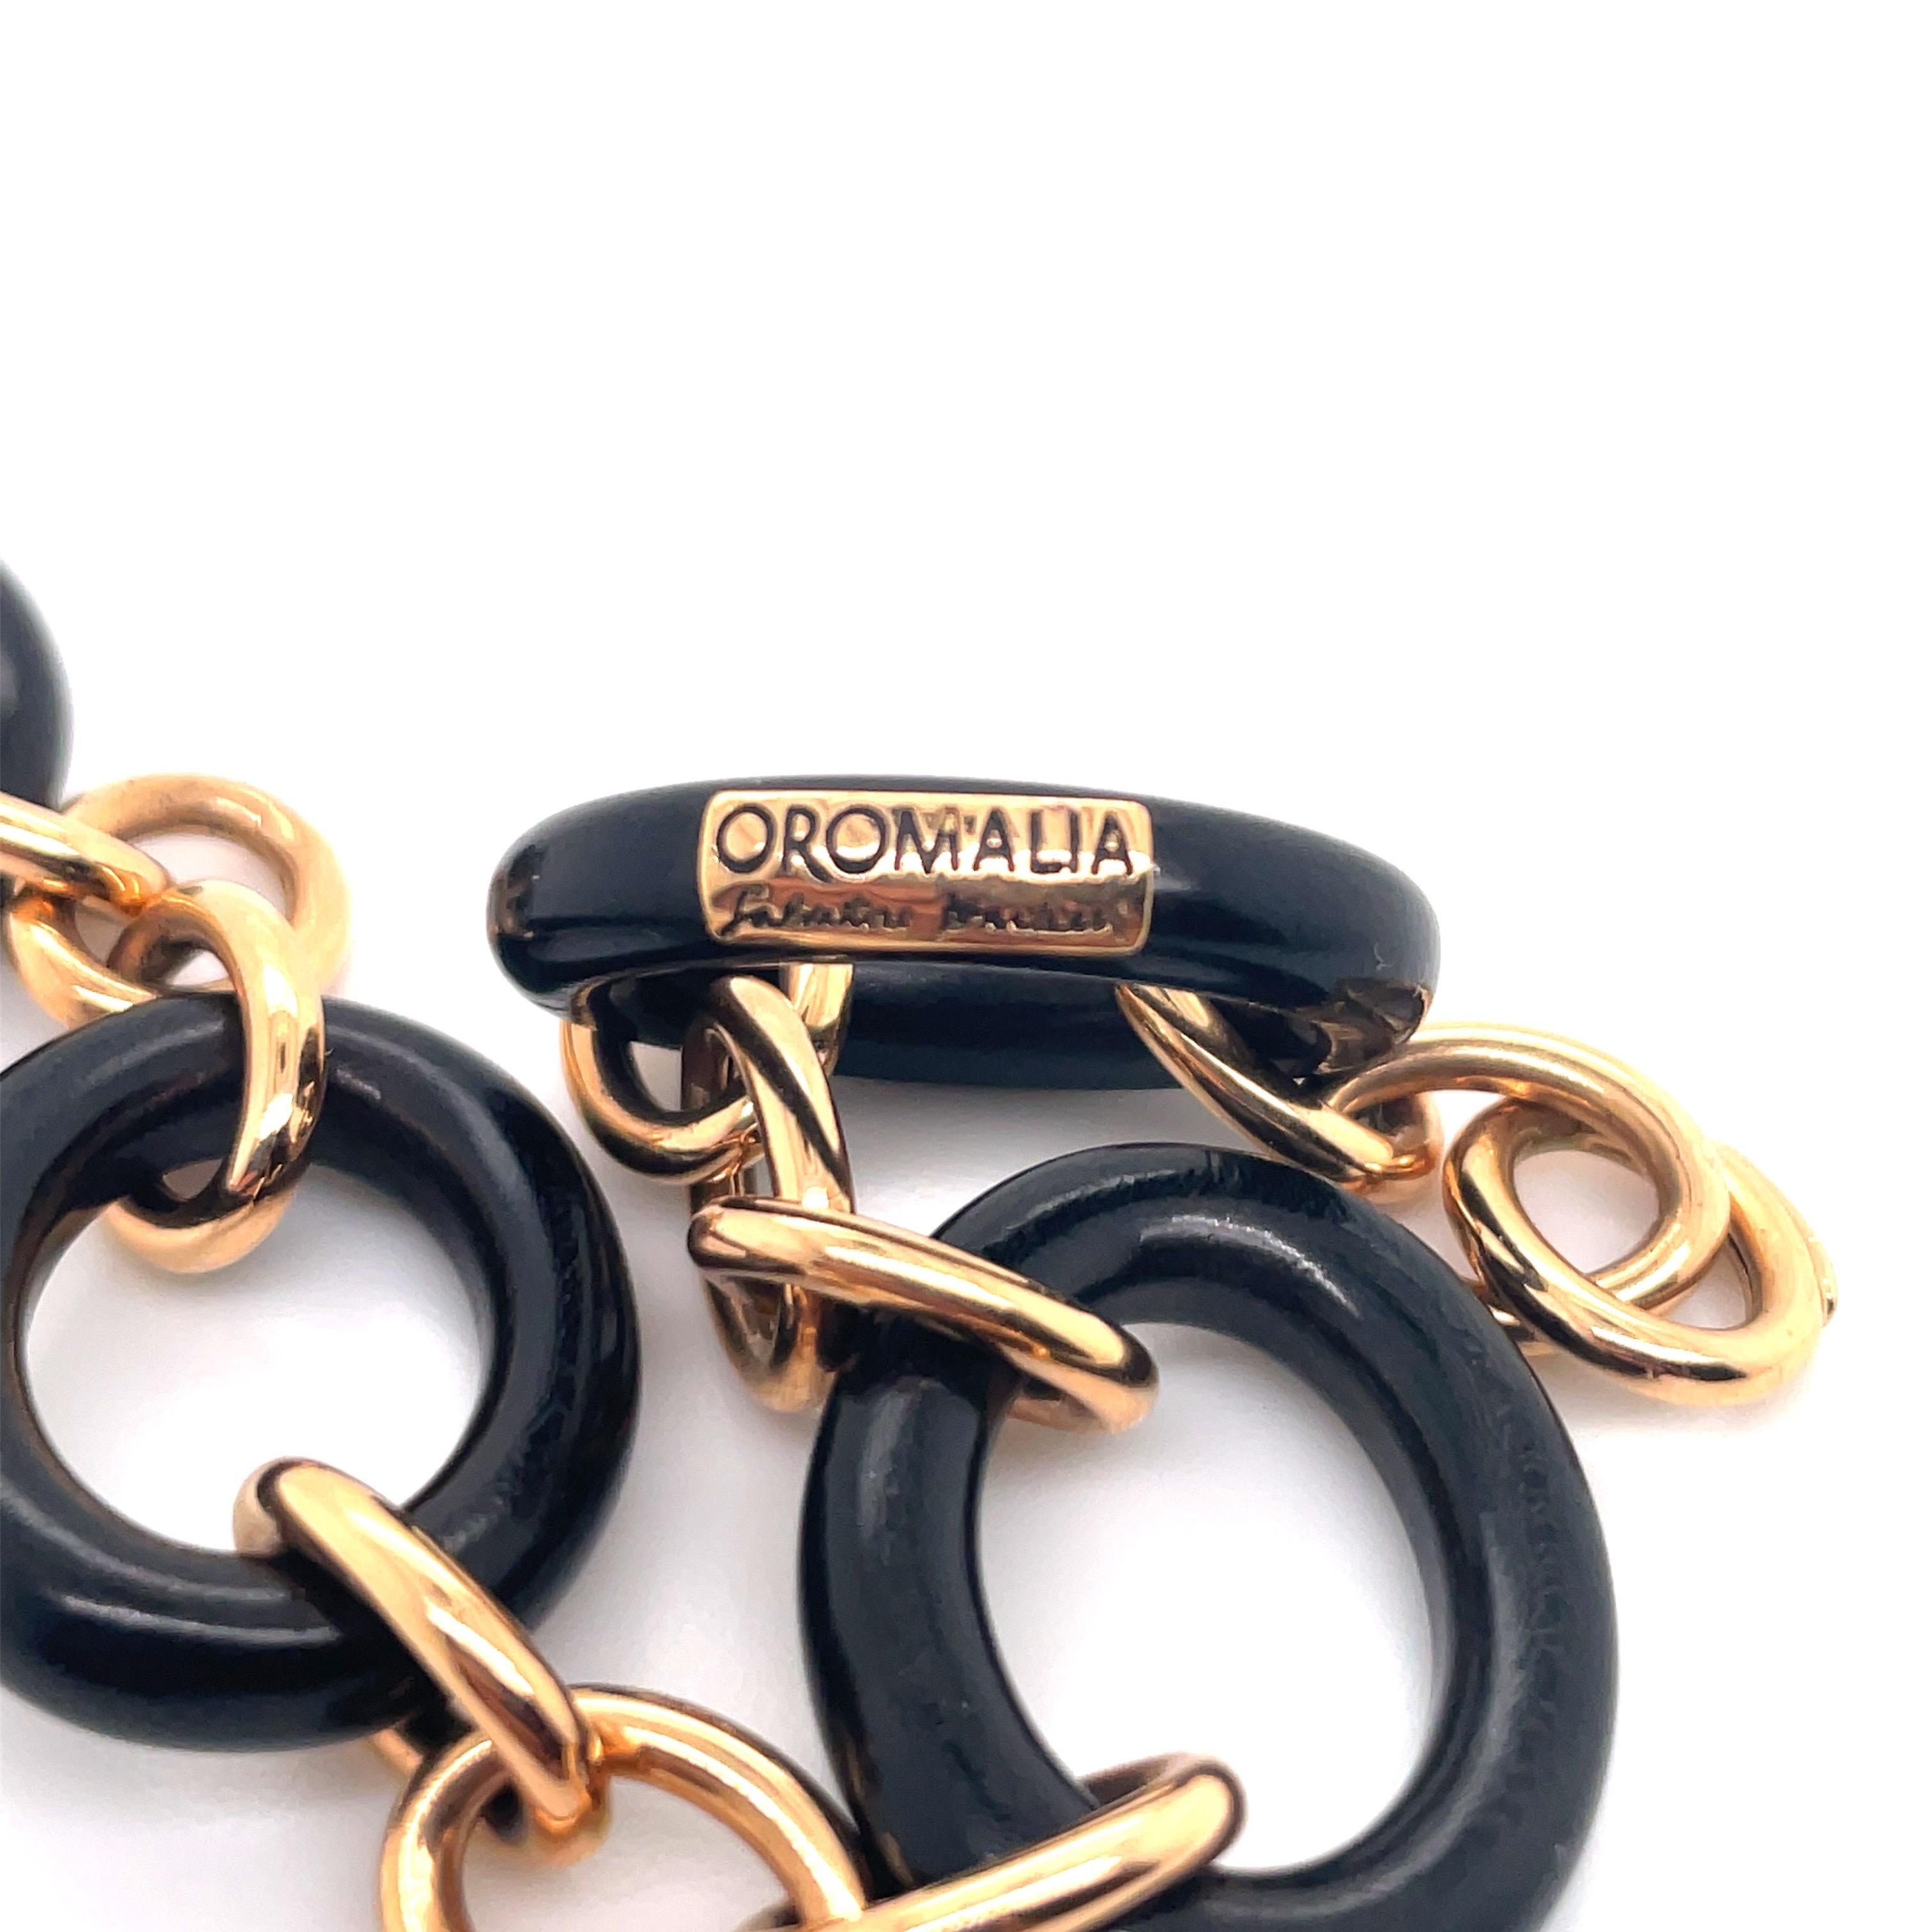 Oromalia Ebony Wood Link Bracelet 18 Karat Rose Gold 15.4 Grams In Excellent Condition For Sale In New York, NY